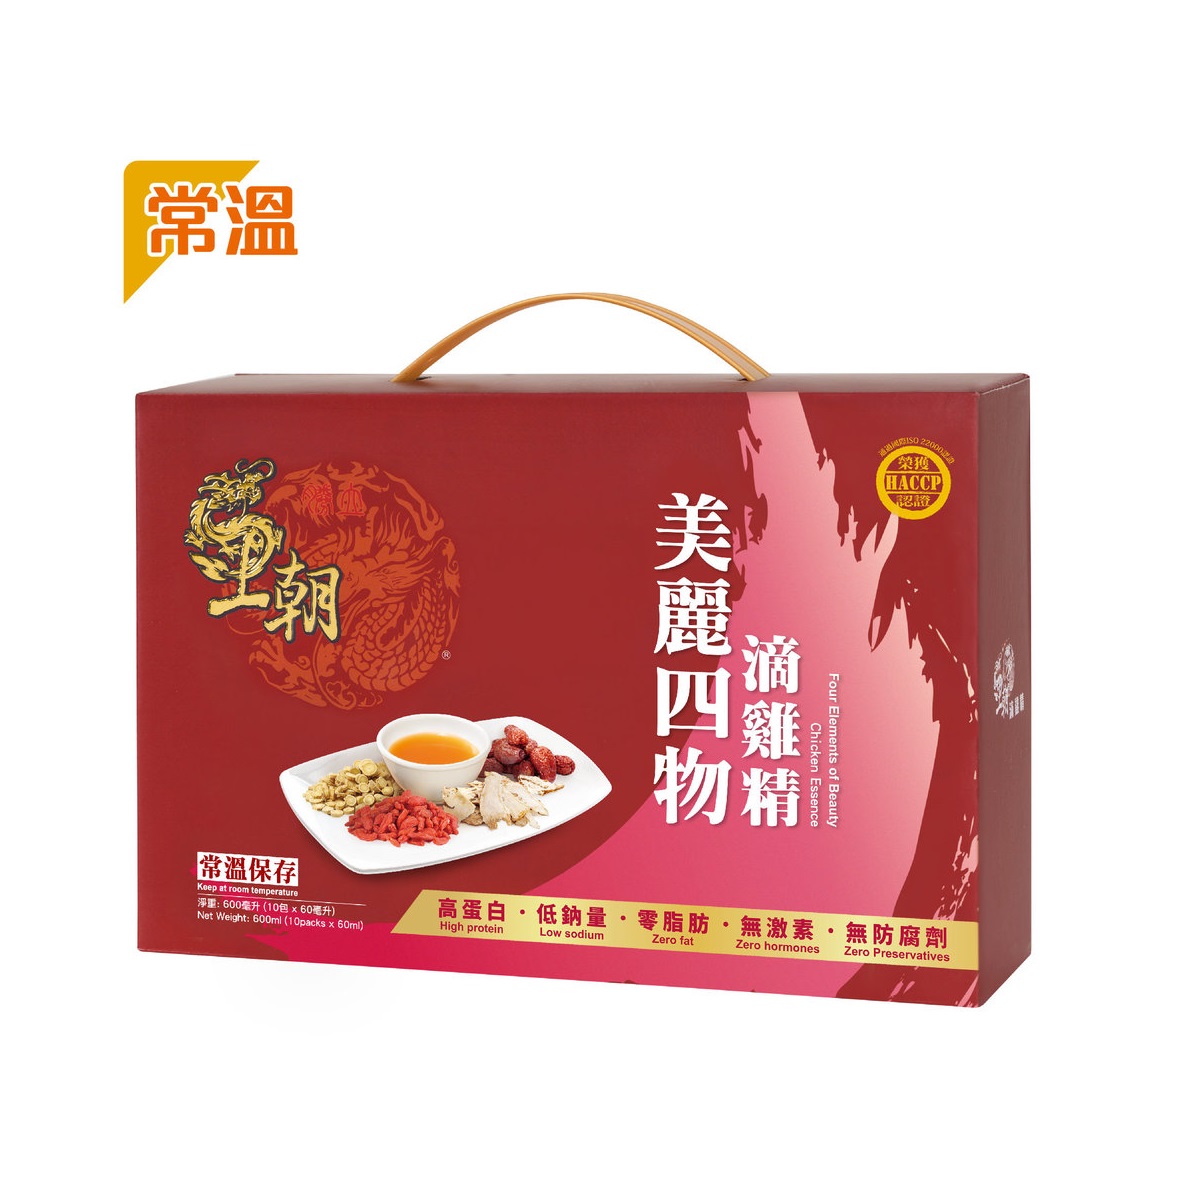 Wang Chao Chicken Essence (Four Element of Beauty Flavor) (Ambient - 10 Packs) Budle of 10